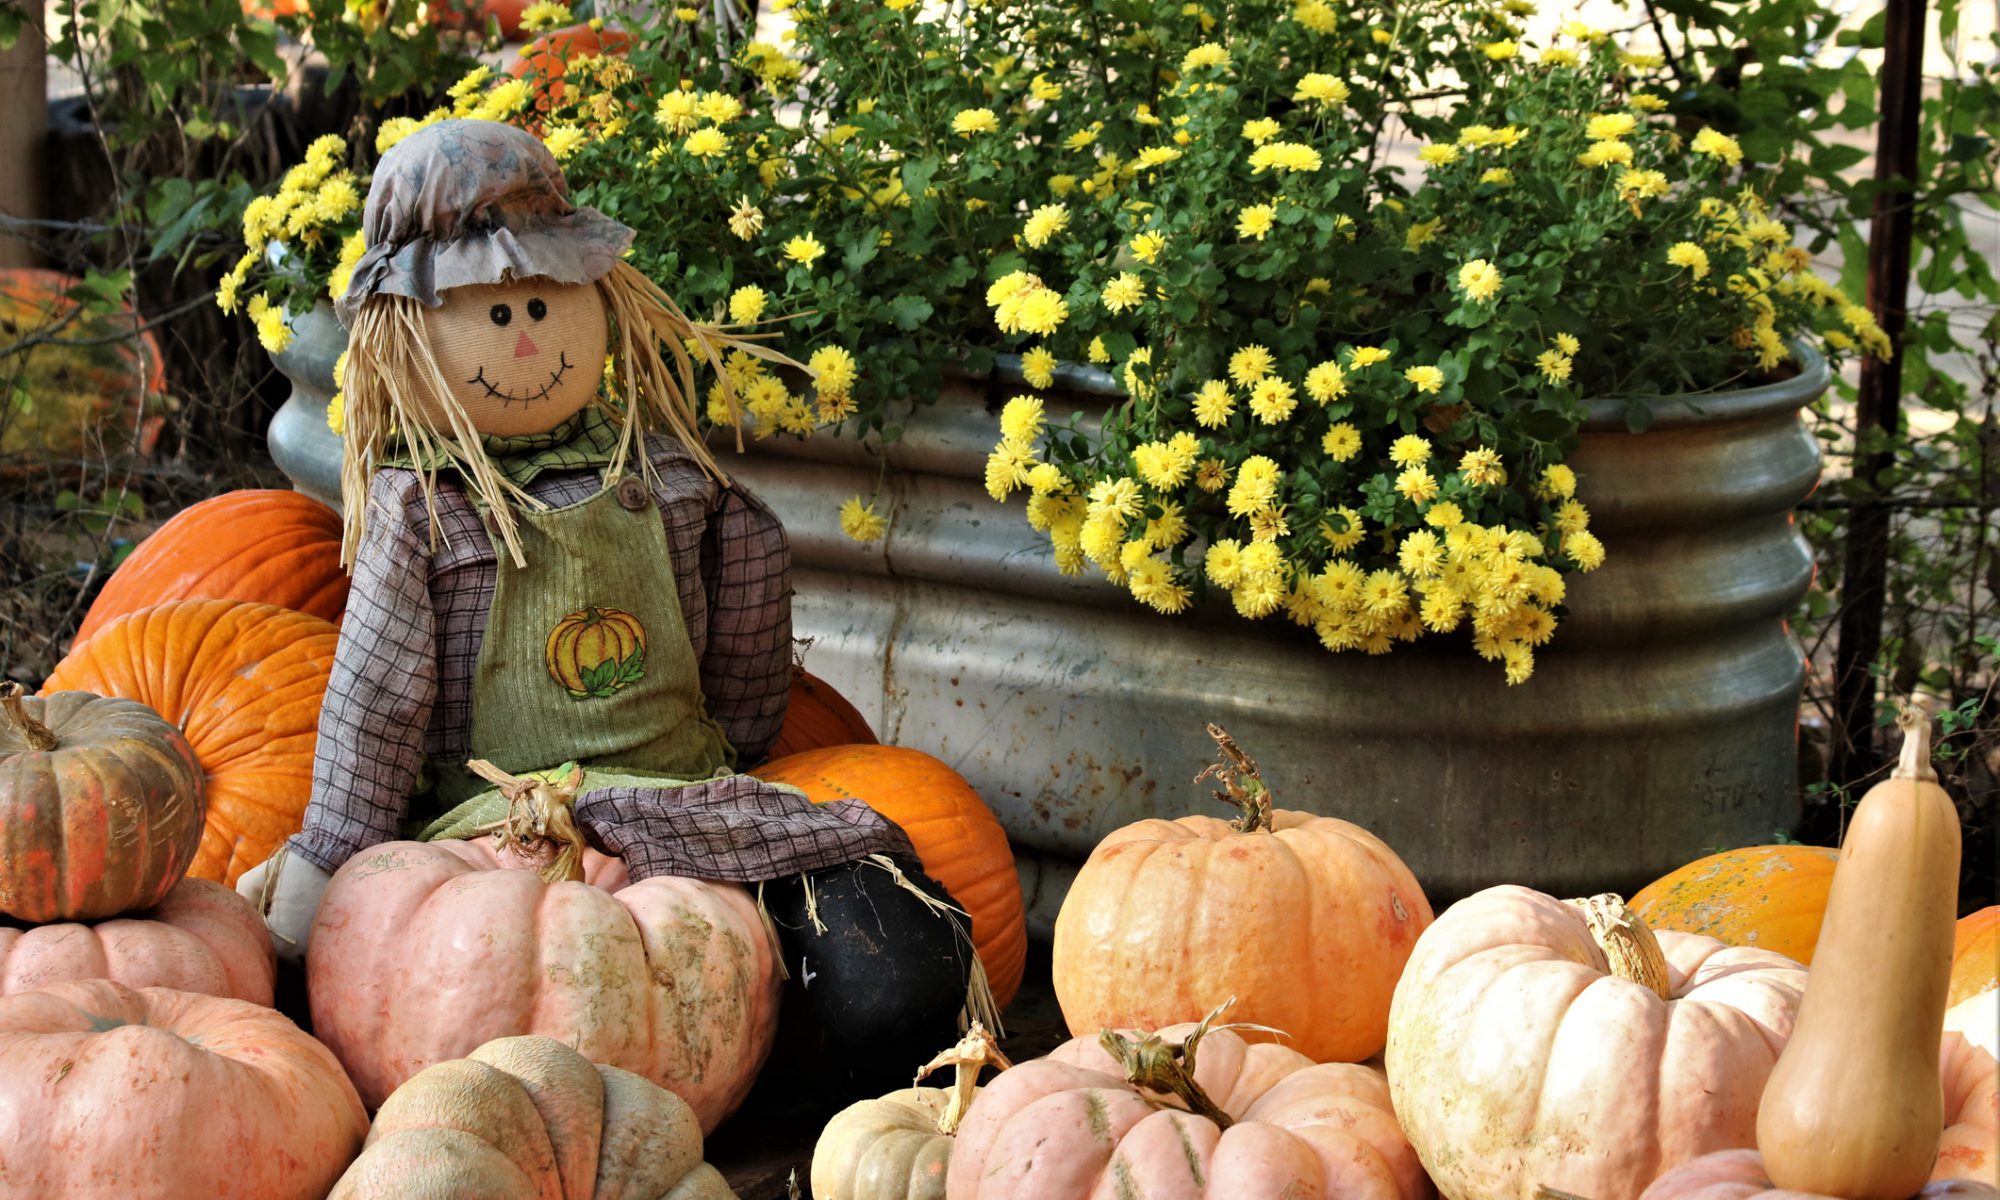 A scarecrow is sitting on a pile of pumpkins at a fall festival.